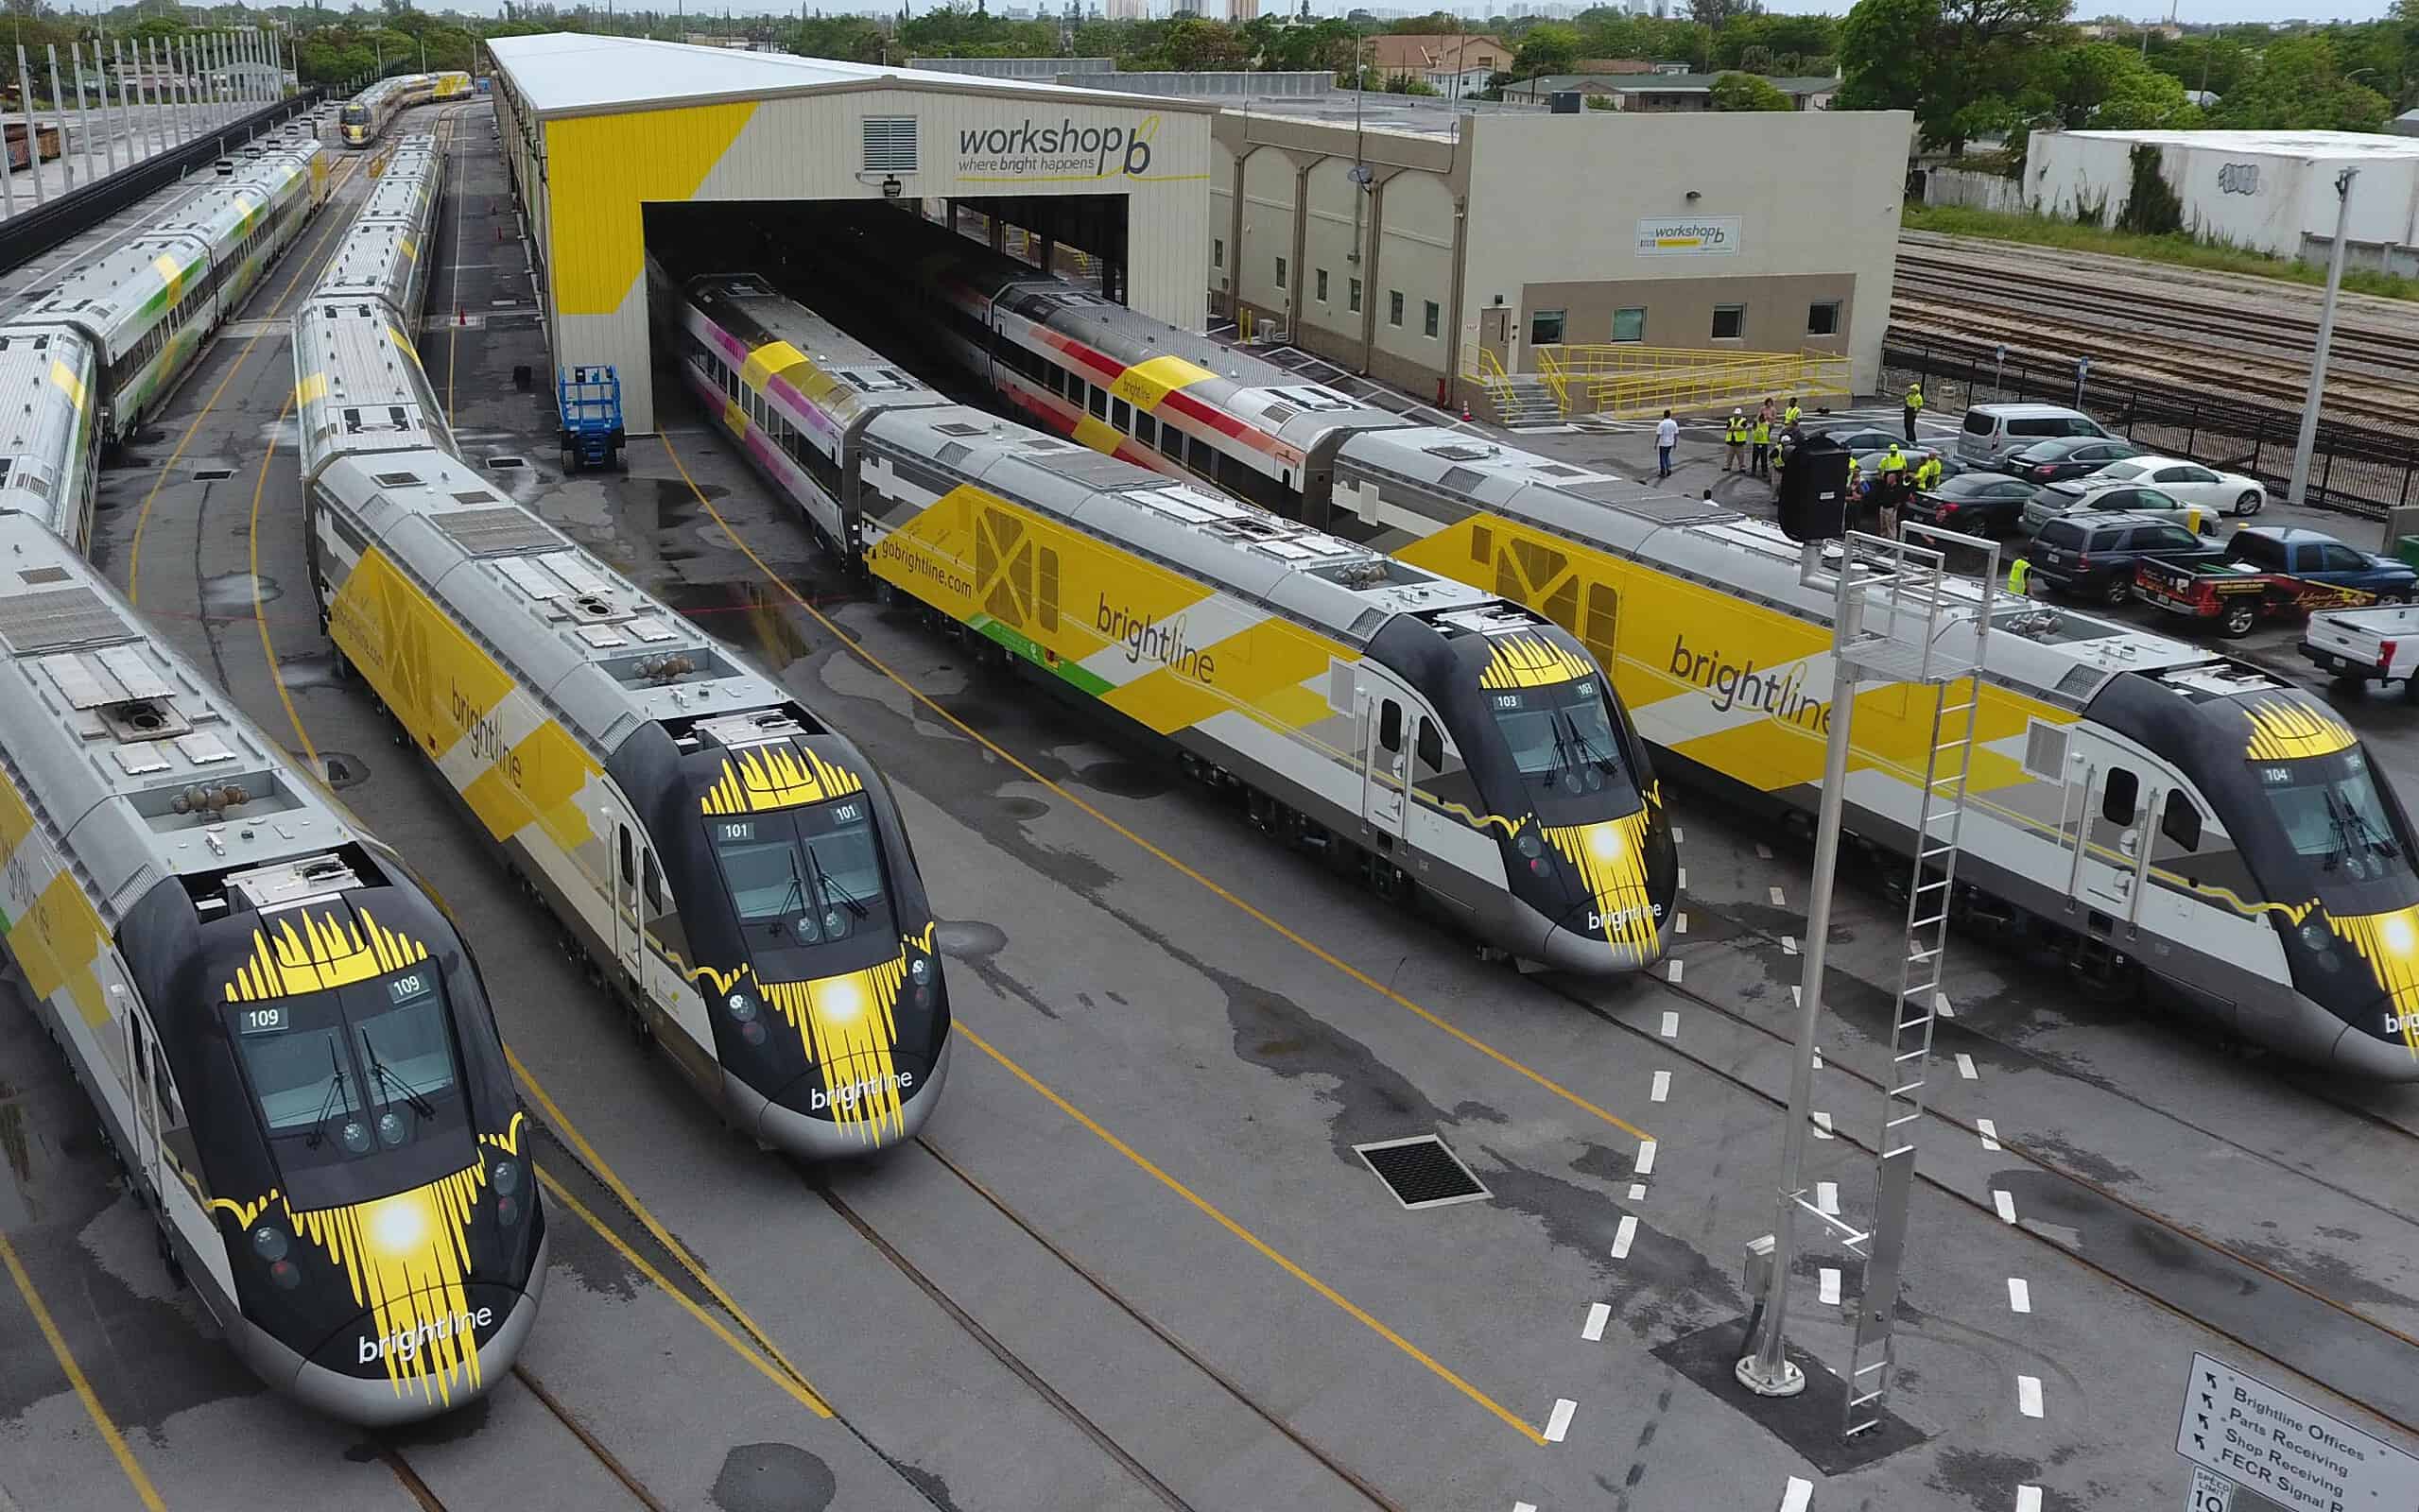 <p>The Brightline has been dubbed as the most accessible and affluent train in the world, featuring wider interior aisles, seamless movement between coaches, and a fantastic range of passenger amenities: onboard Wi-Fi, luggage storage, and pet-friendly accommodations. Luxury and eco-friendliness are indeed married in the Brightline train.</p><p>Sharks, lions, alligators, and more! Don’t miss today’s latest and most exciting animal news. <strong><a href="https://www.msn.com/en-us/channel/source/AZ%20Animals%20US/sr-vid-7etr9q8xun6k6508c3nufaum0de3dqktiq6h27ddeagnfug30wka">Click here to access the A-Z Animals profile page</a> and be sure to hit the <em>Follow</em> button here or at the top of this article!</strong></p> <p>Have feedback? Add a comment below!</p>